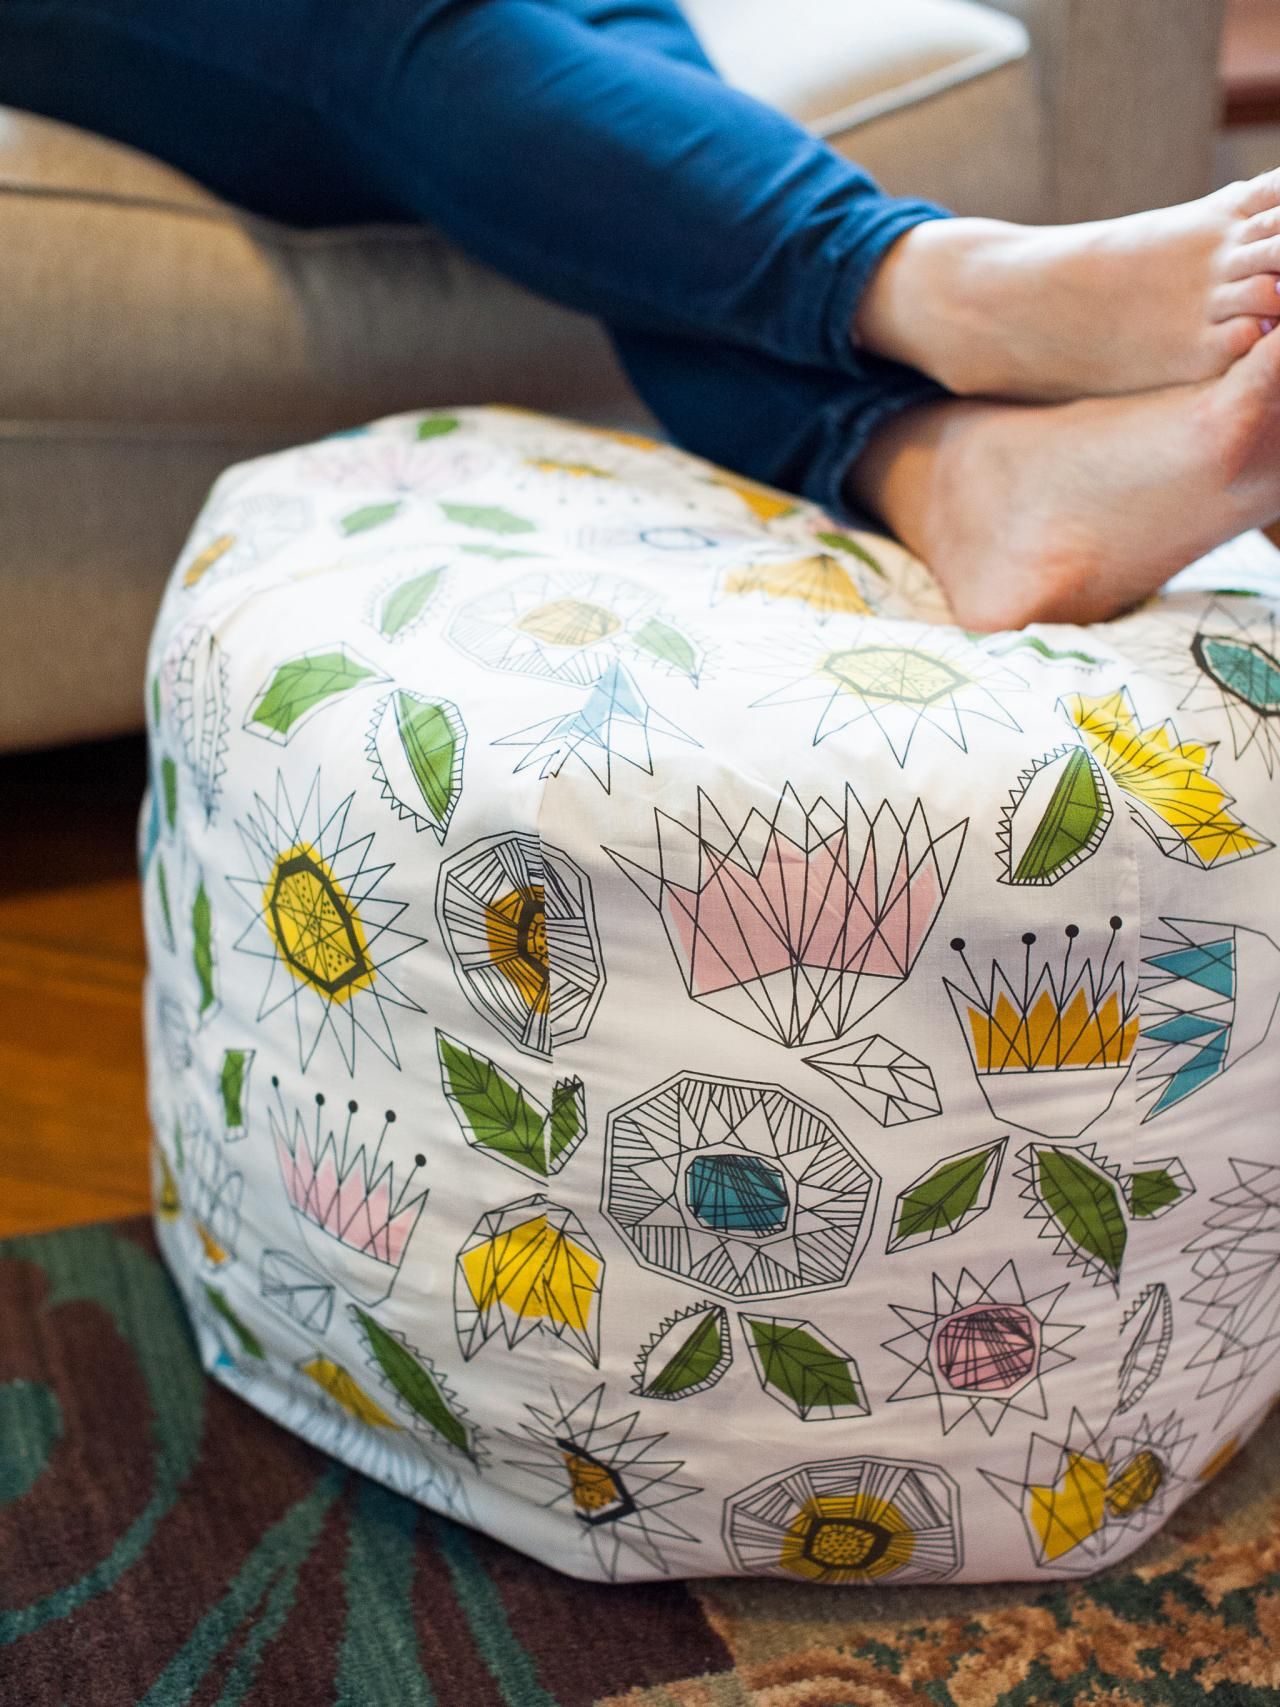 How To Make A Fabric Pouf Ottoman | Hgtv For Fabric Upholstered Ottomans (View 12 of 15)